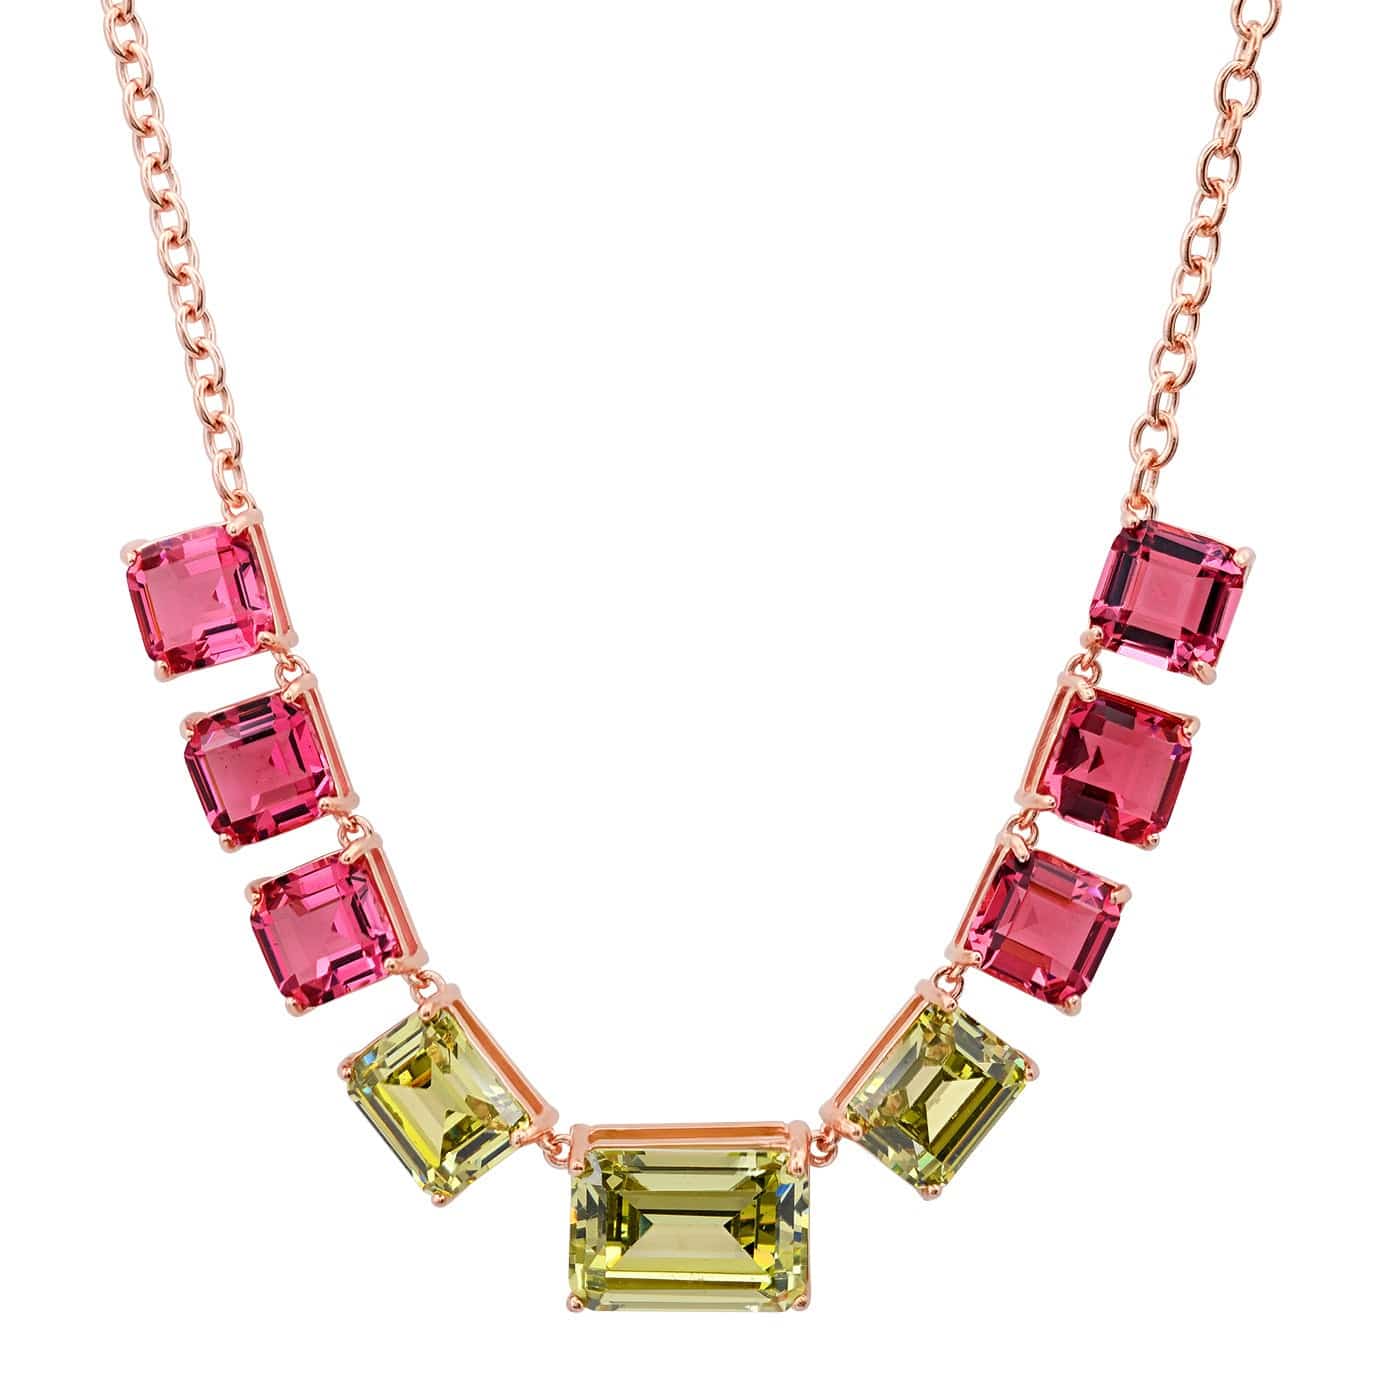 TAI JEWELRY Necklace RG/PD Chunky Emerald Cut Glass Stone Necklace